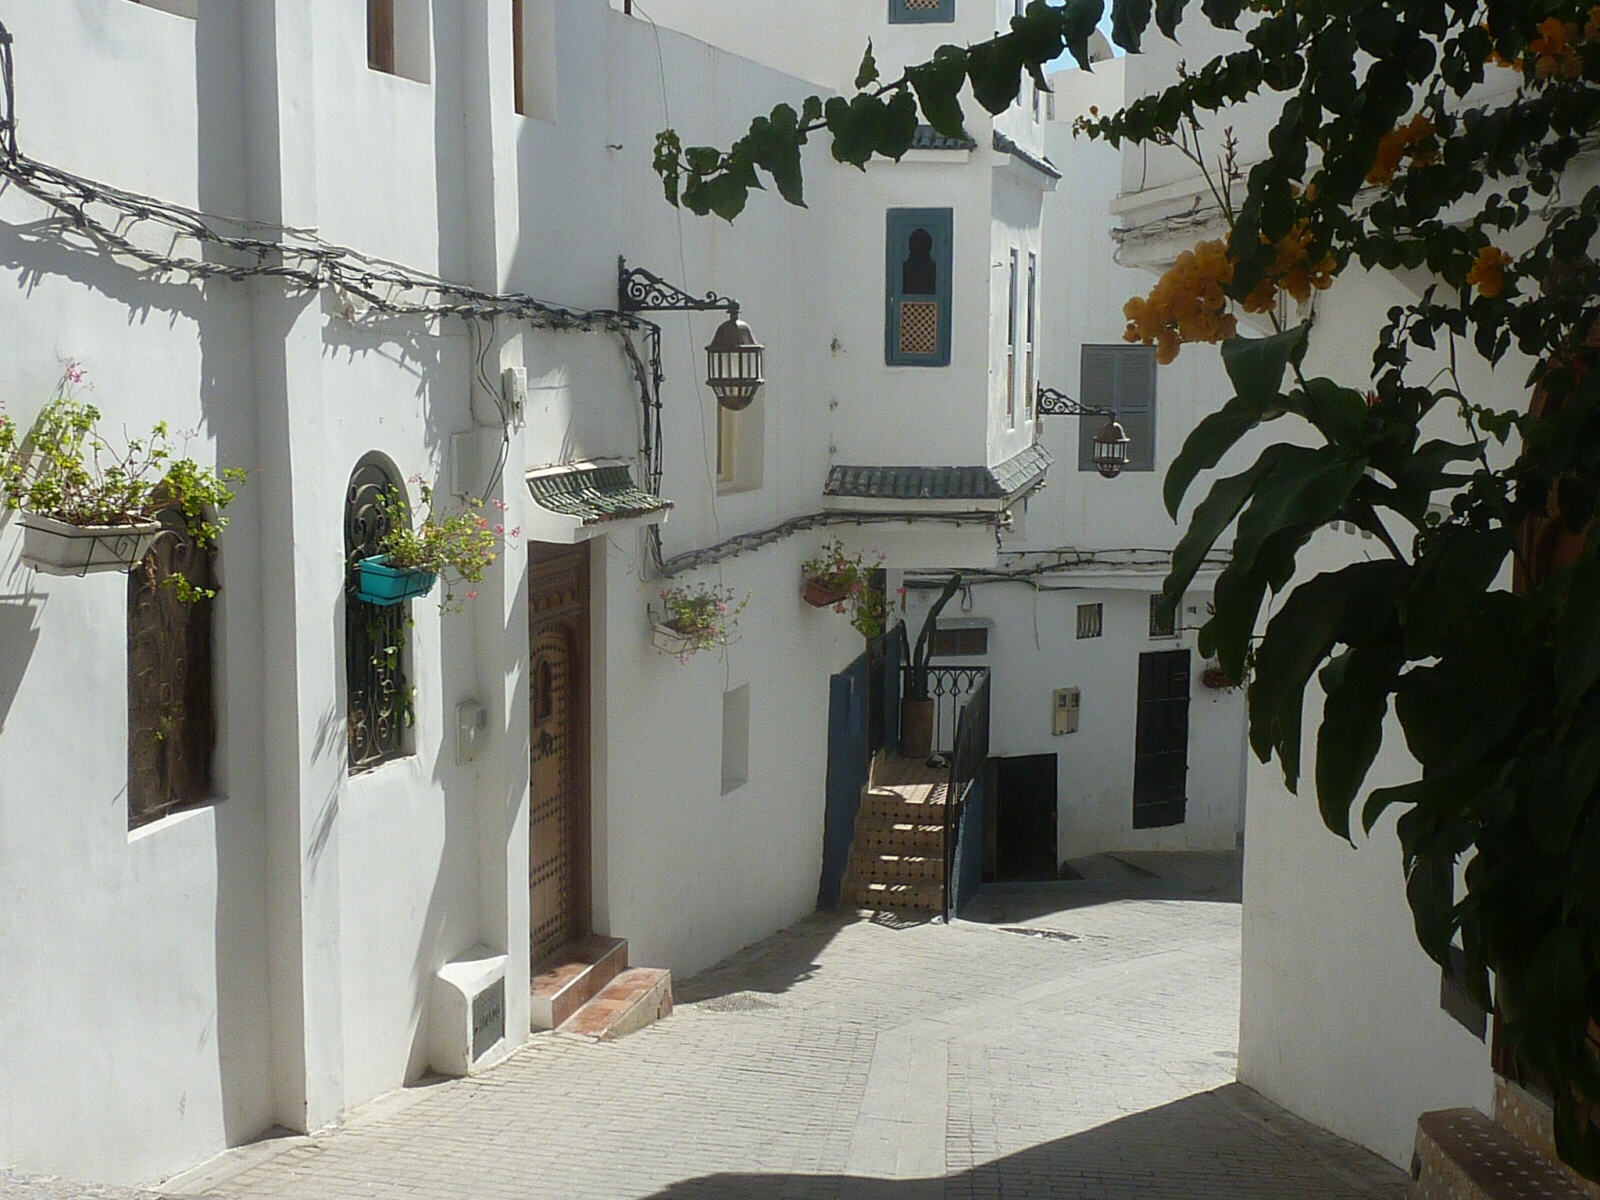 Houses in a lane in the Kasbah in Tangier